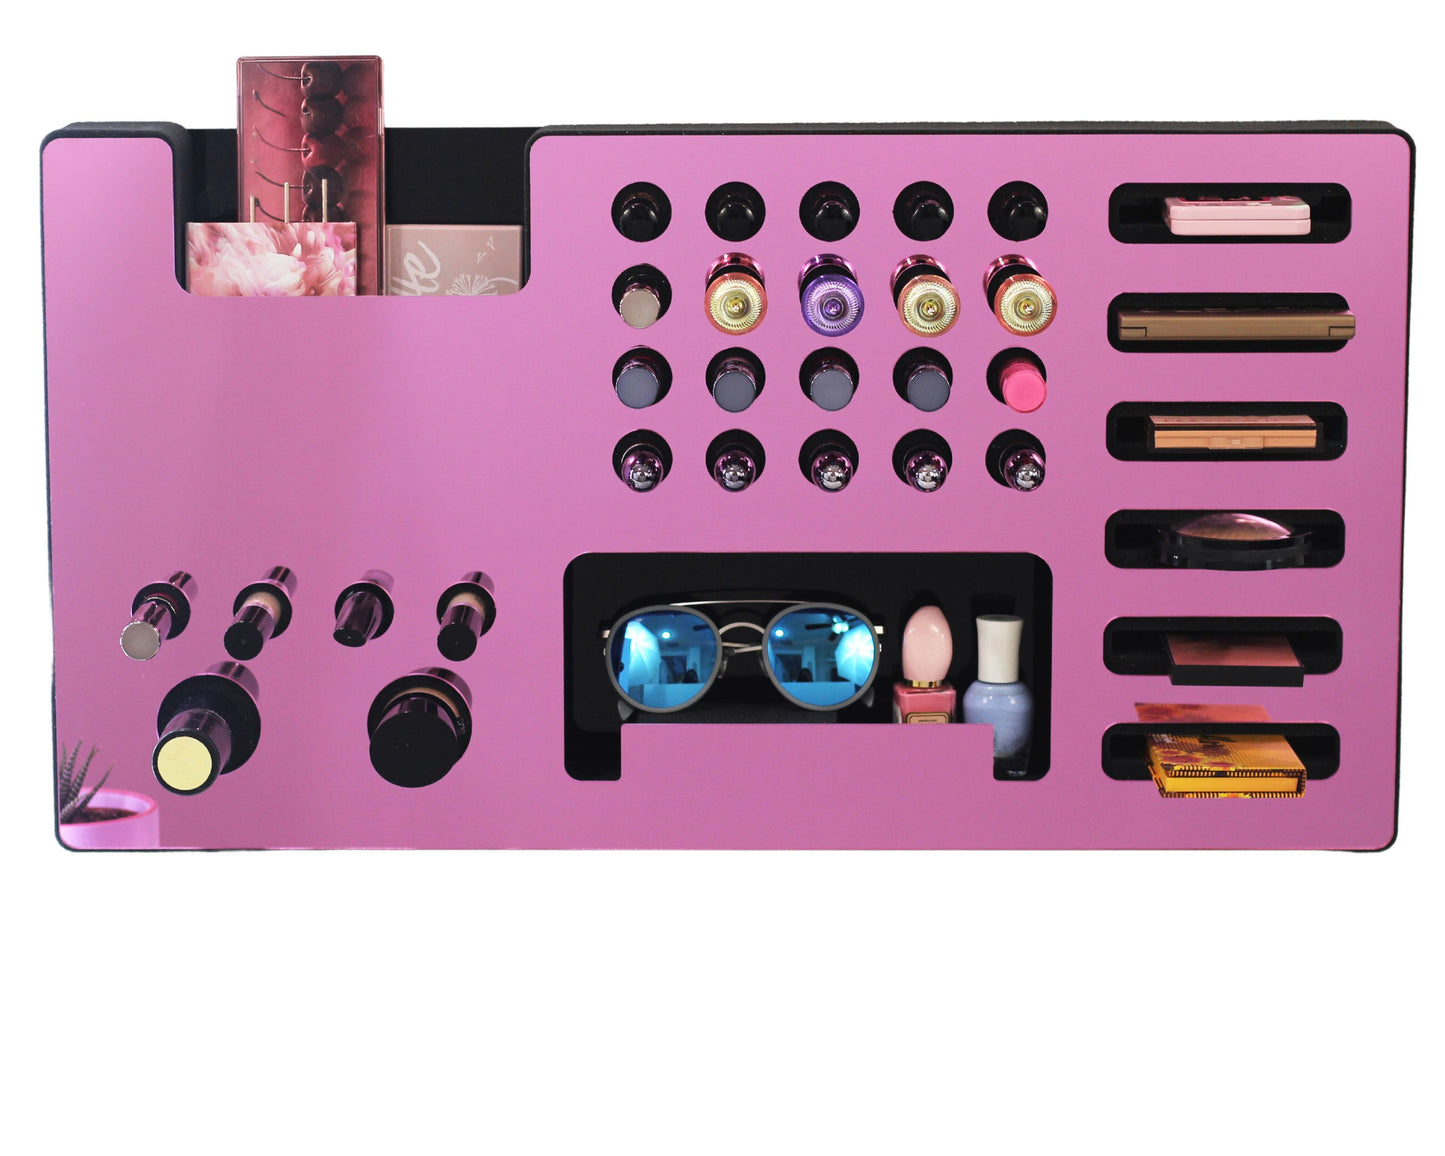 Mirror Pink Ultra Complete Makeup Solution Organizer shown mounted on the wall holding lipsticks, lip glosses, nail polishes, brushes, sunglasses and more by keeping items accessible and off of the counter. Shown next to a makeup vanity with samples of suggested items the organizer can hold. Shown with a white background.